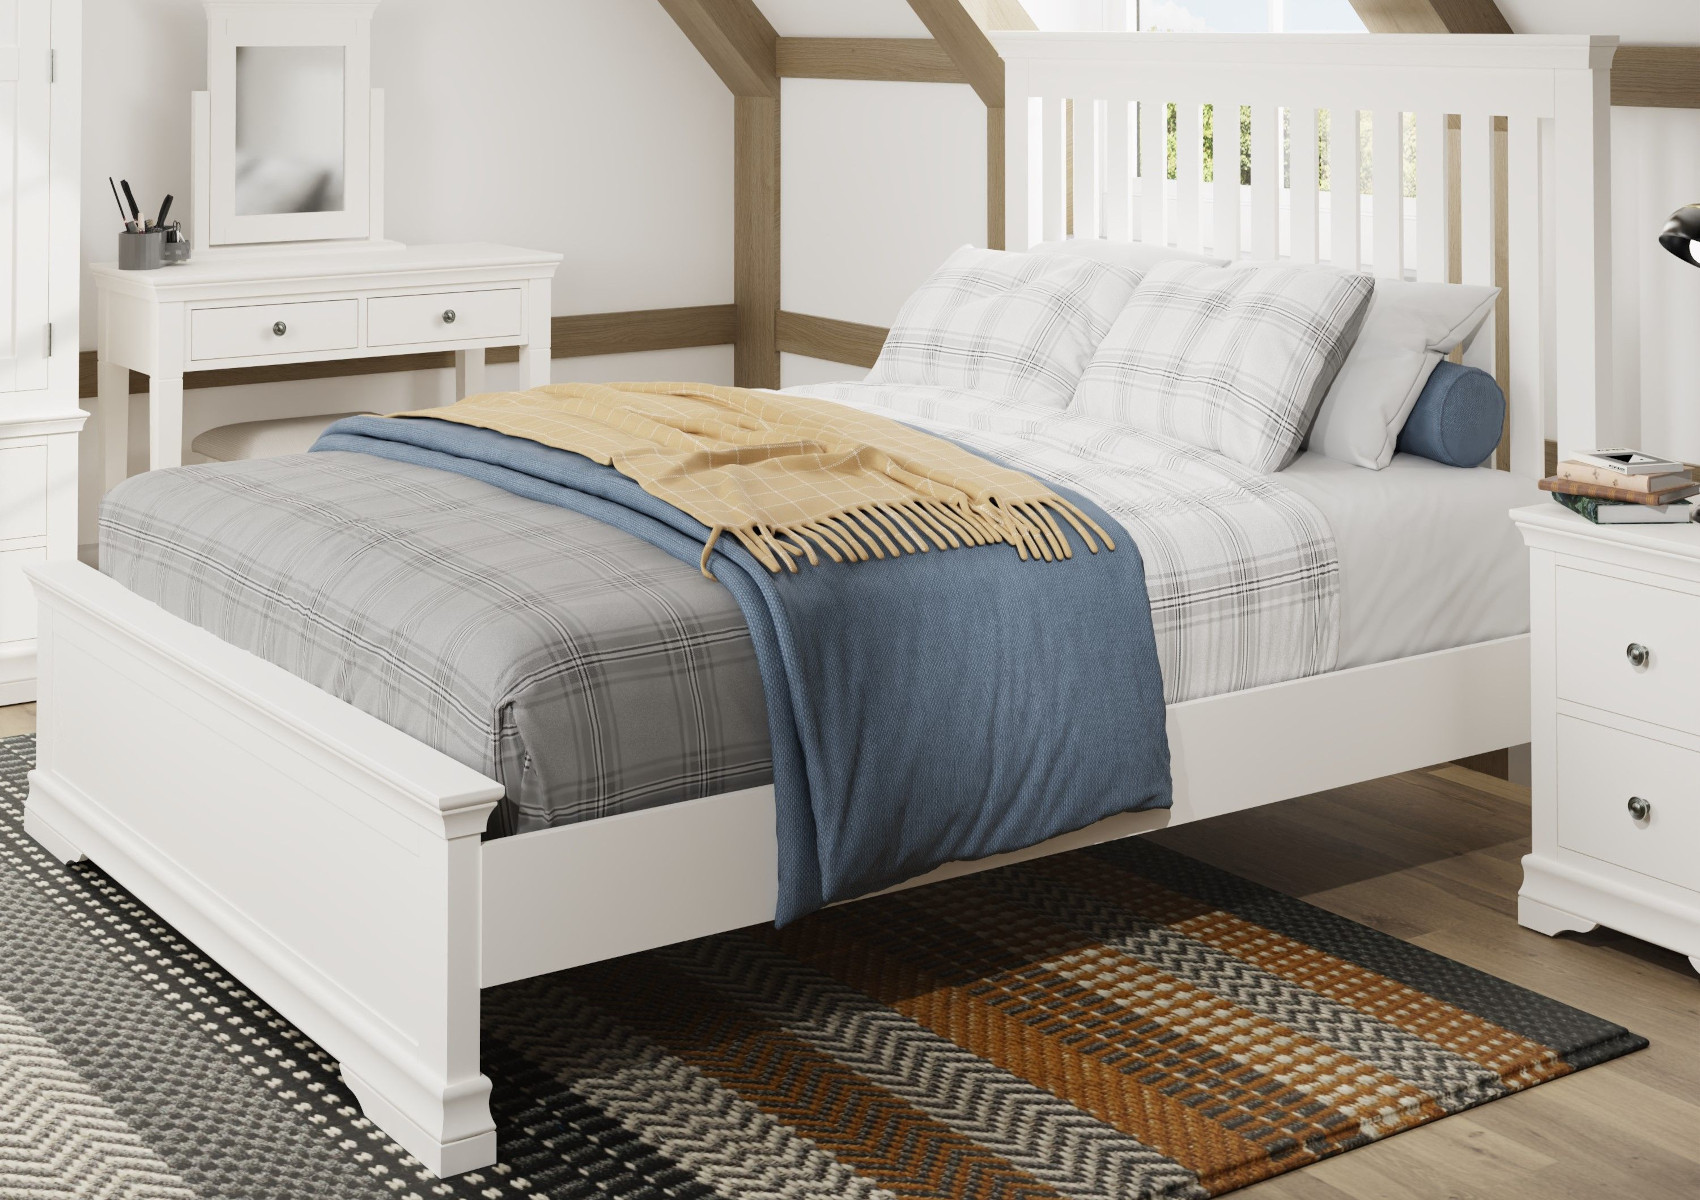 View Anna White Wooden Bed Frame Time4Sleep information